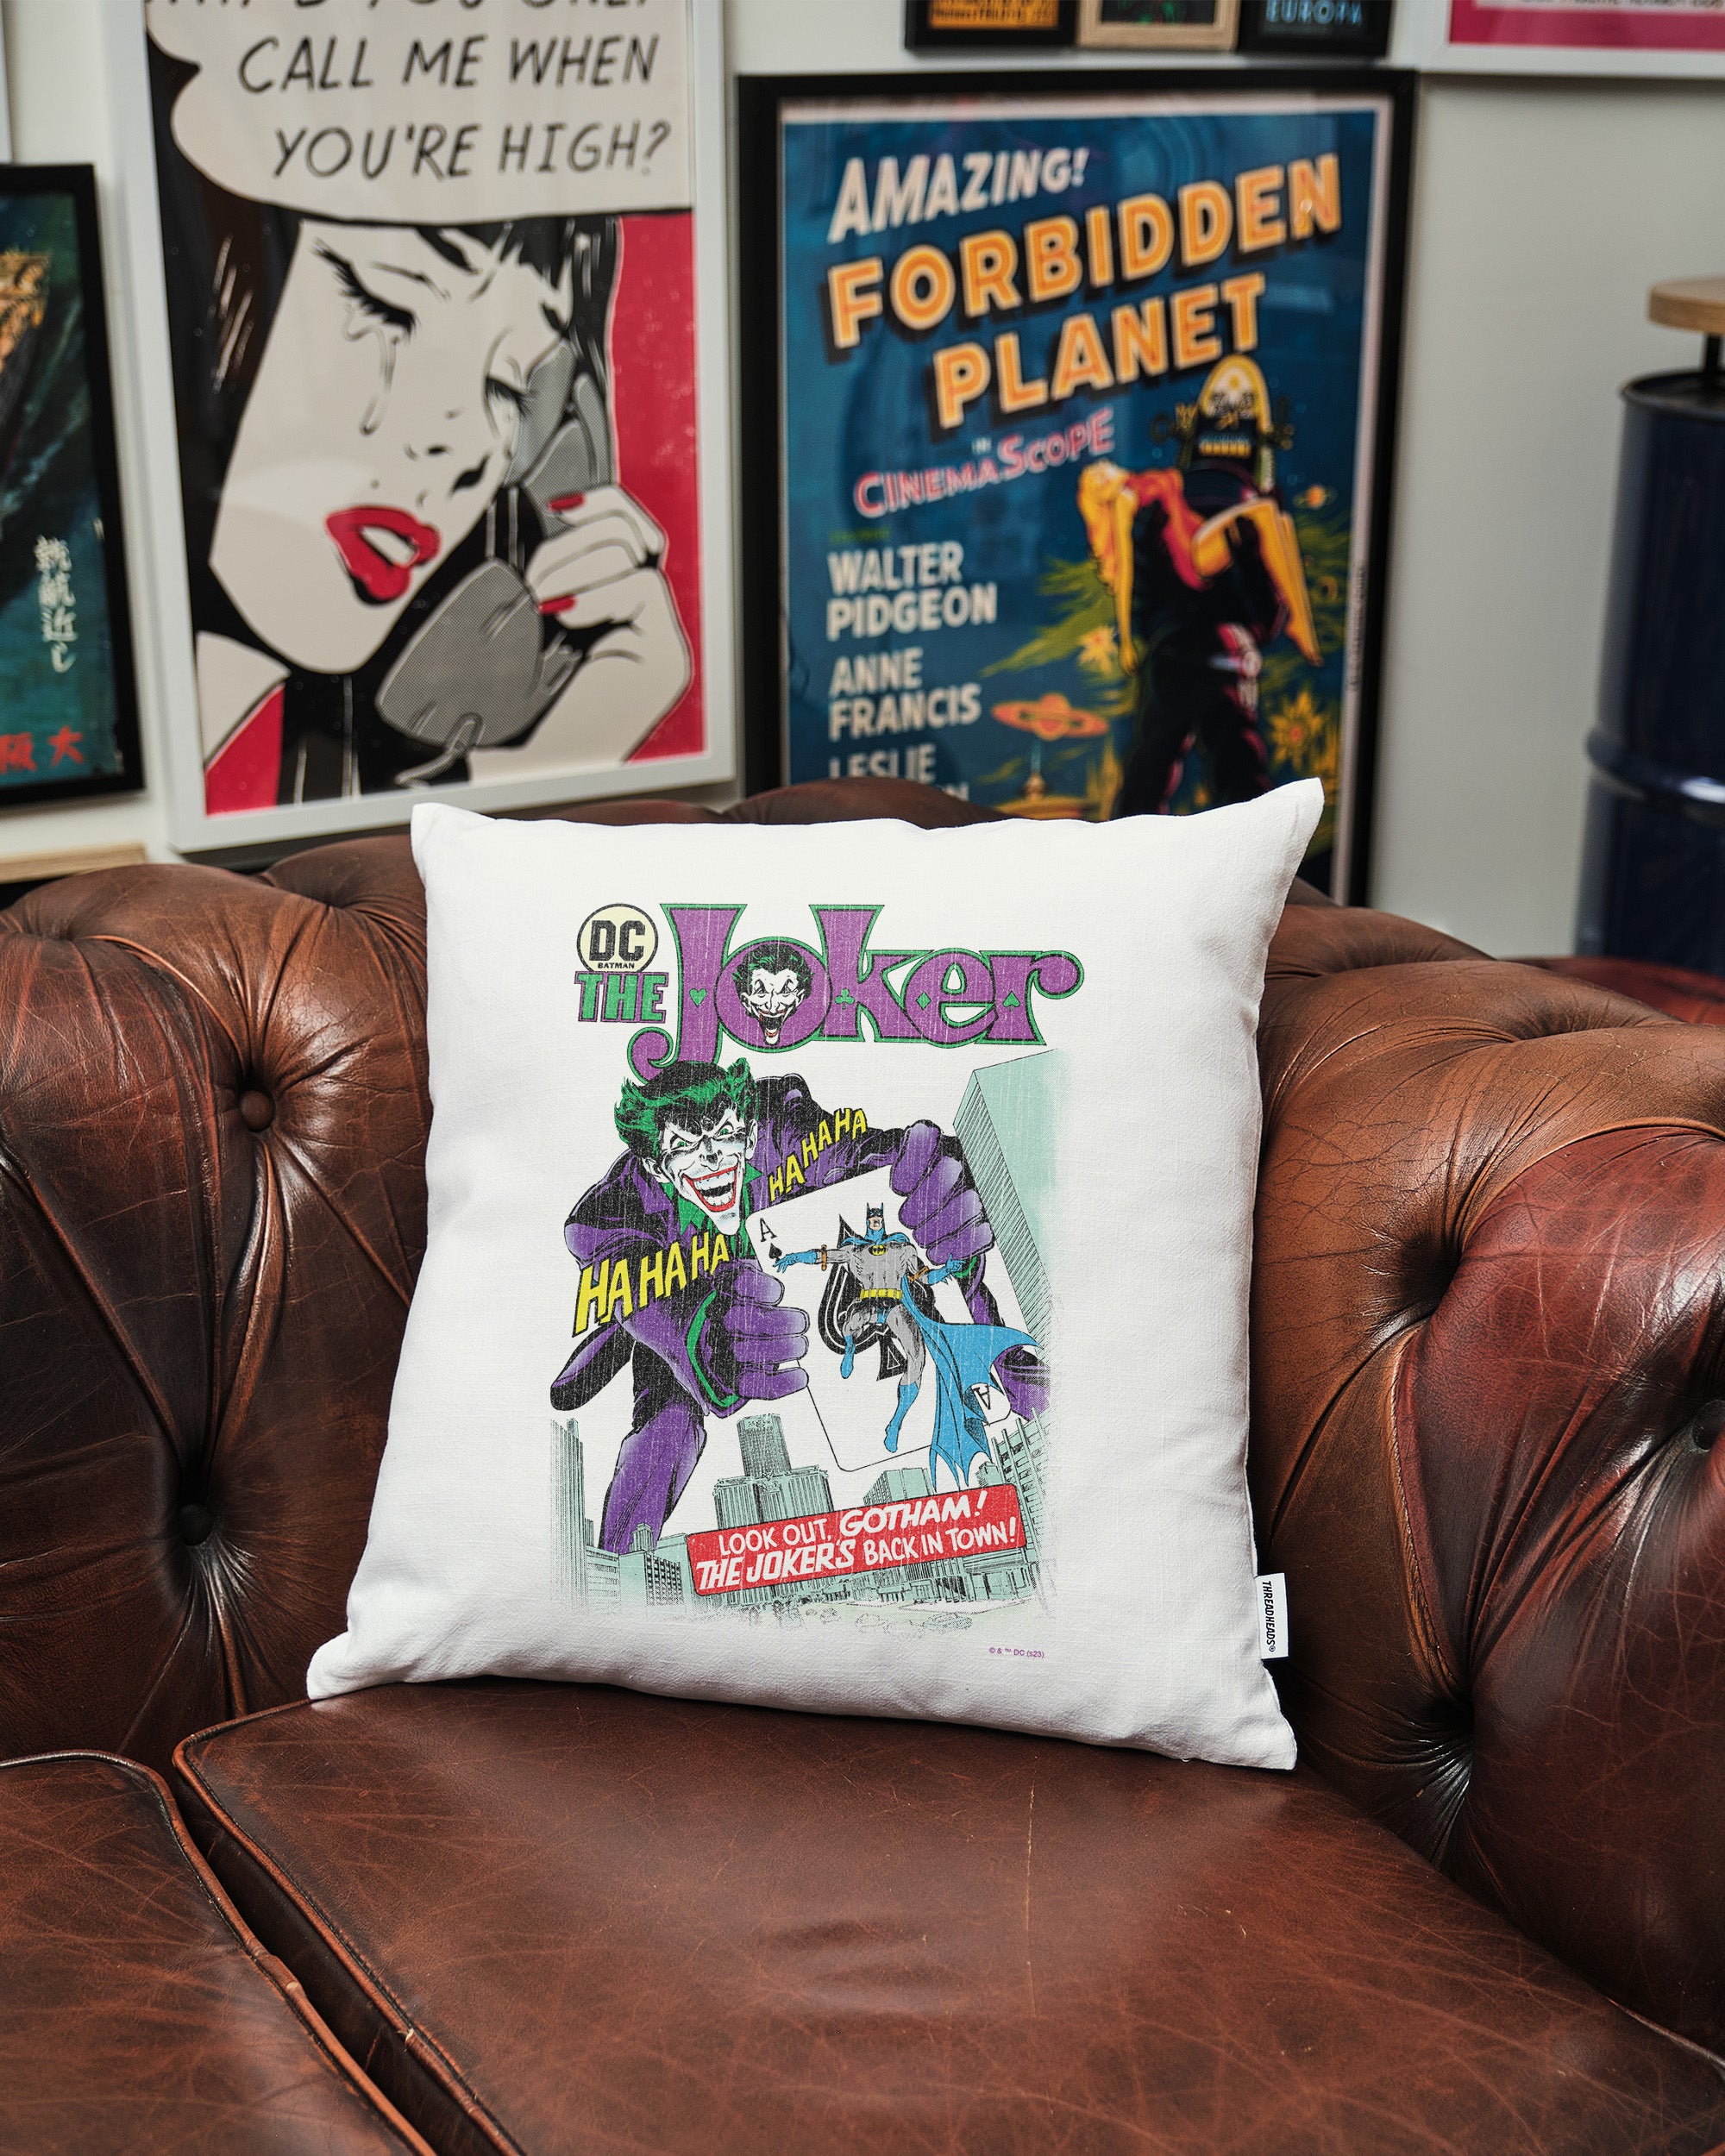 Jokers Back In Town Cushion